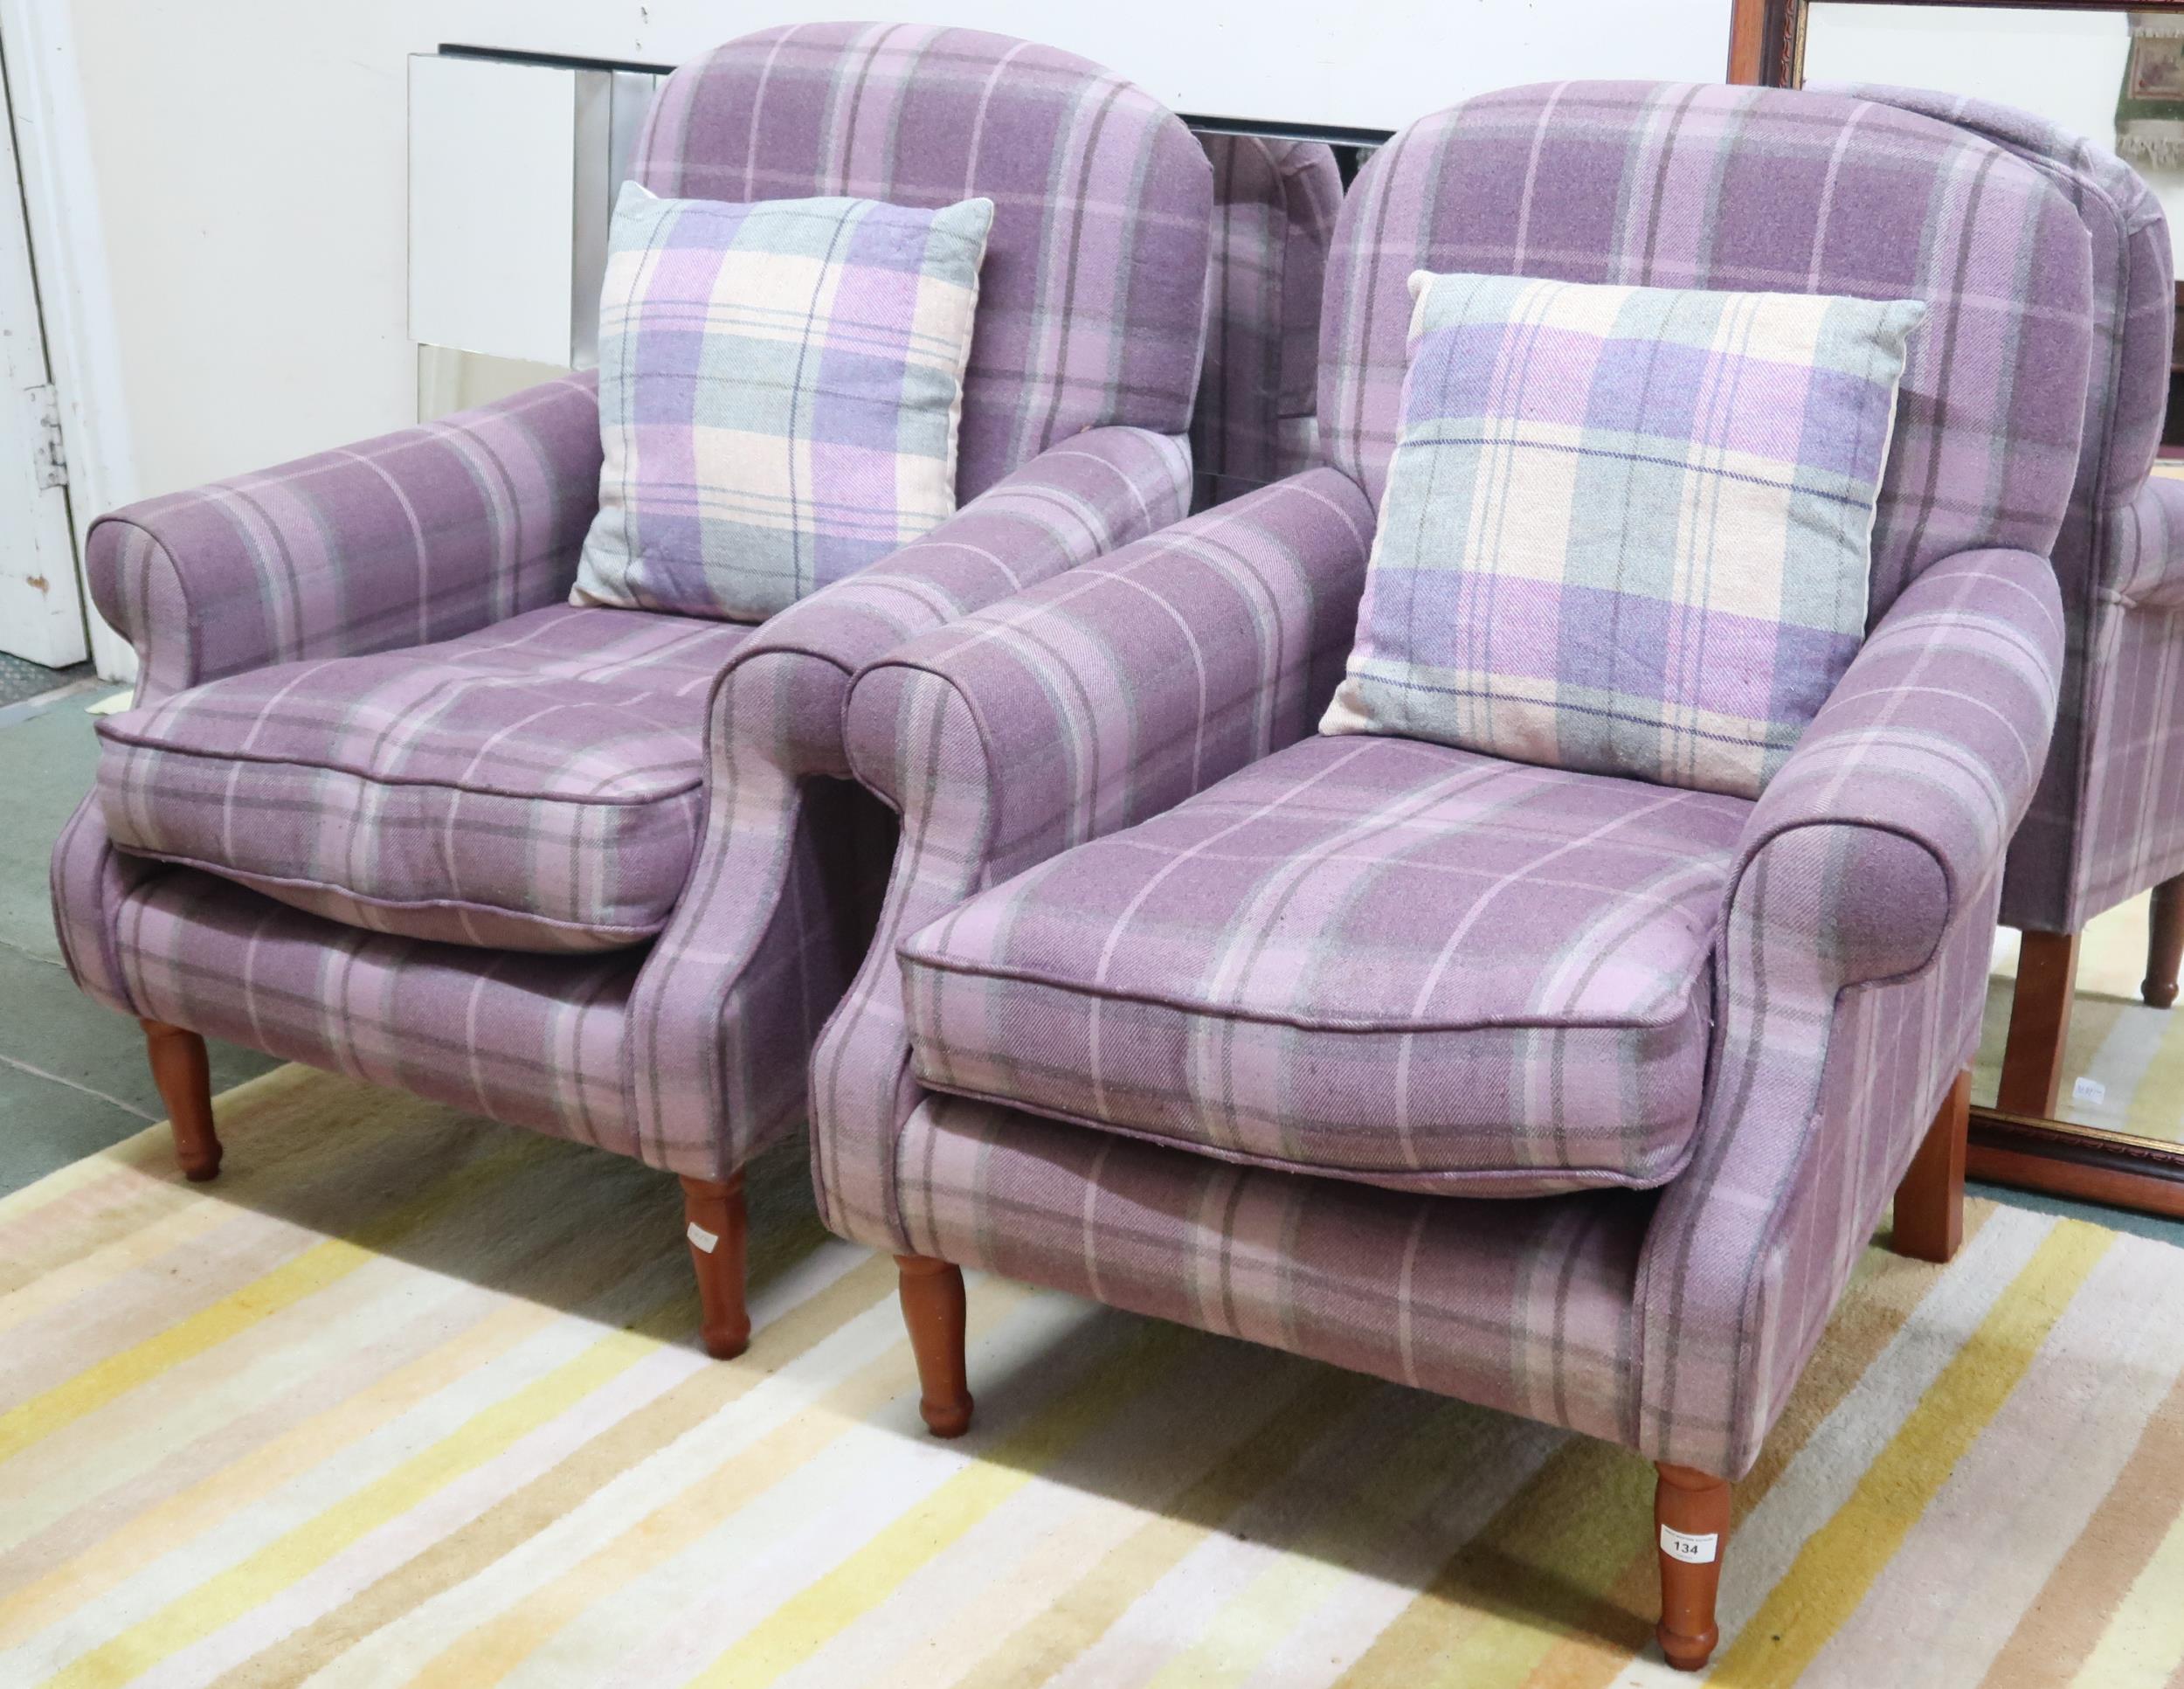 A pair of contemporary armchair upholstered in purple plaid wool fabric with Quallofil by Dacron - Image 2 of 2